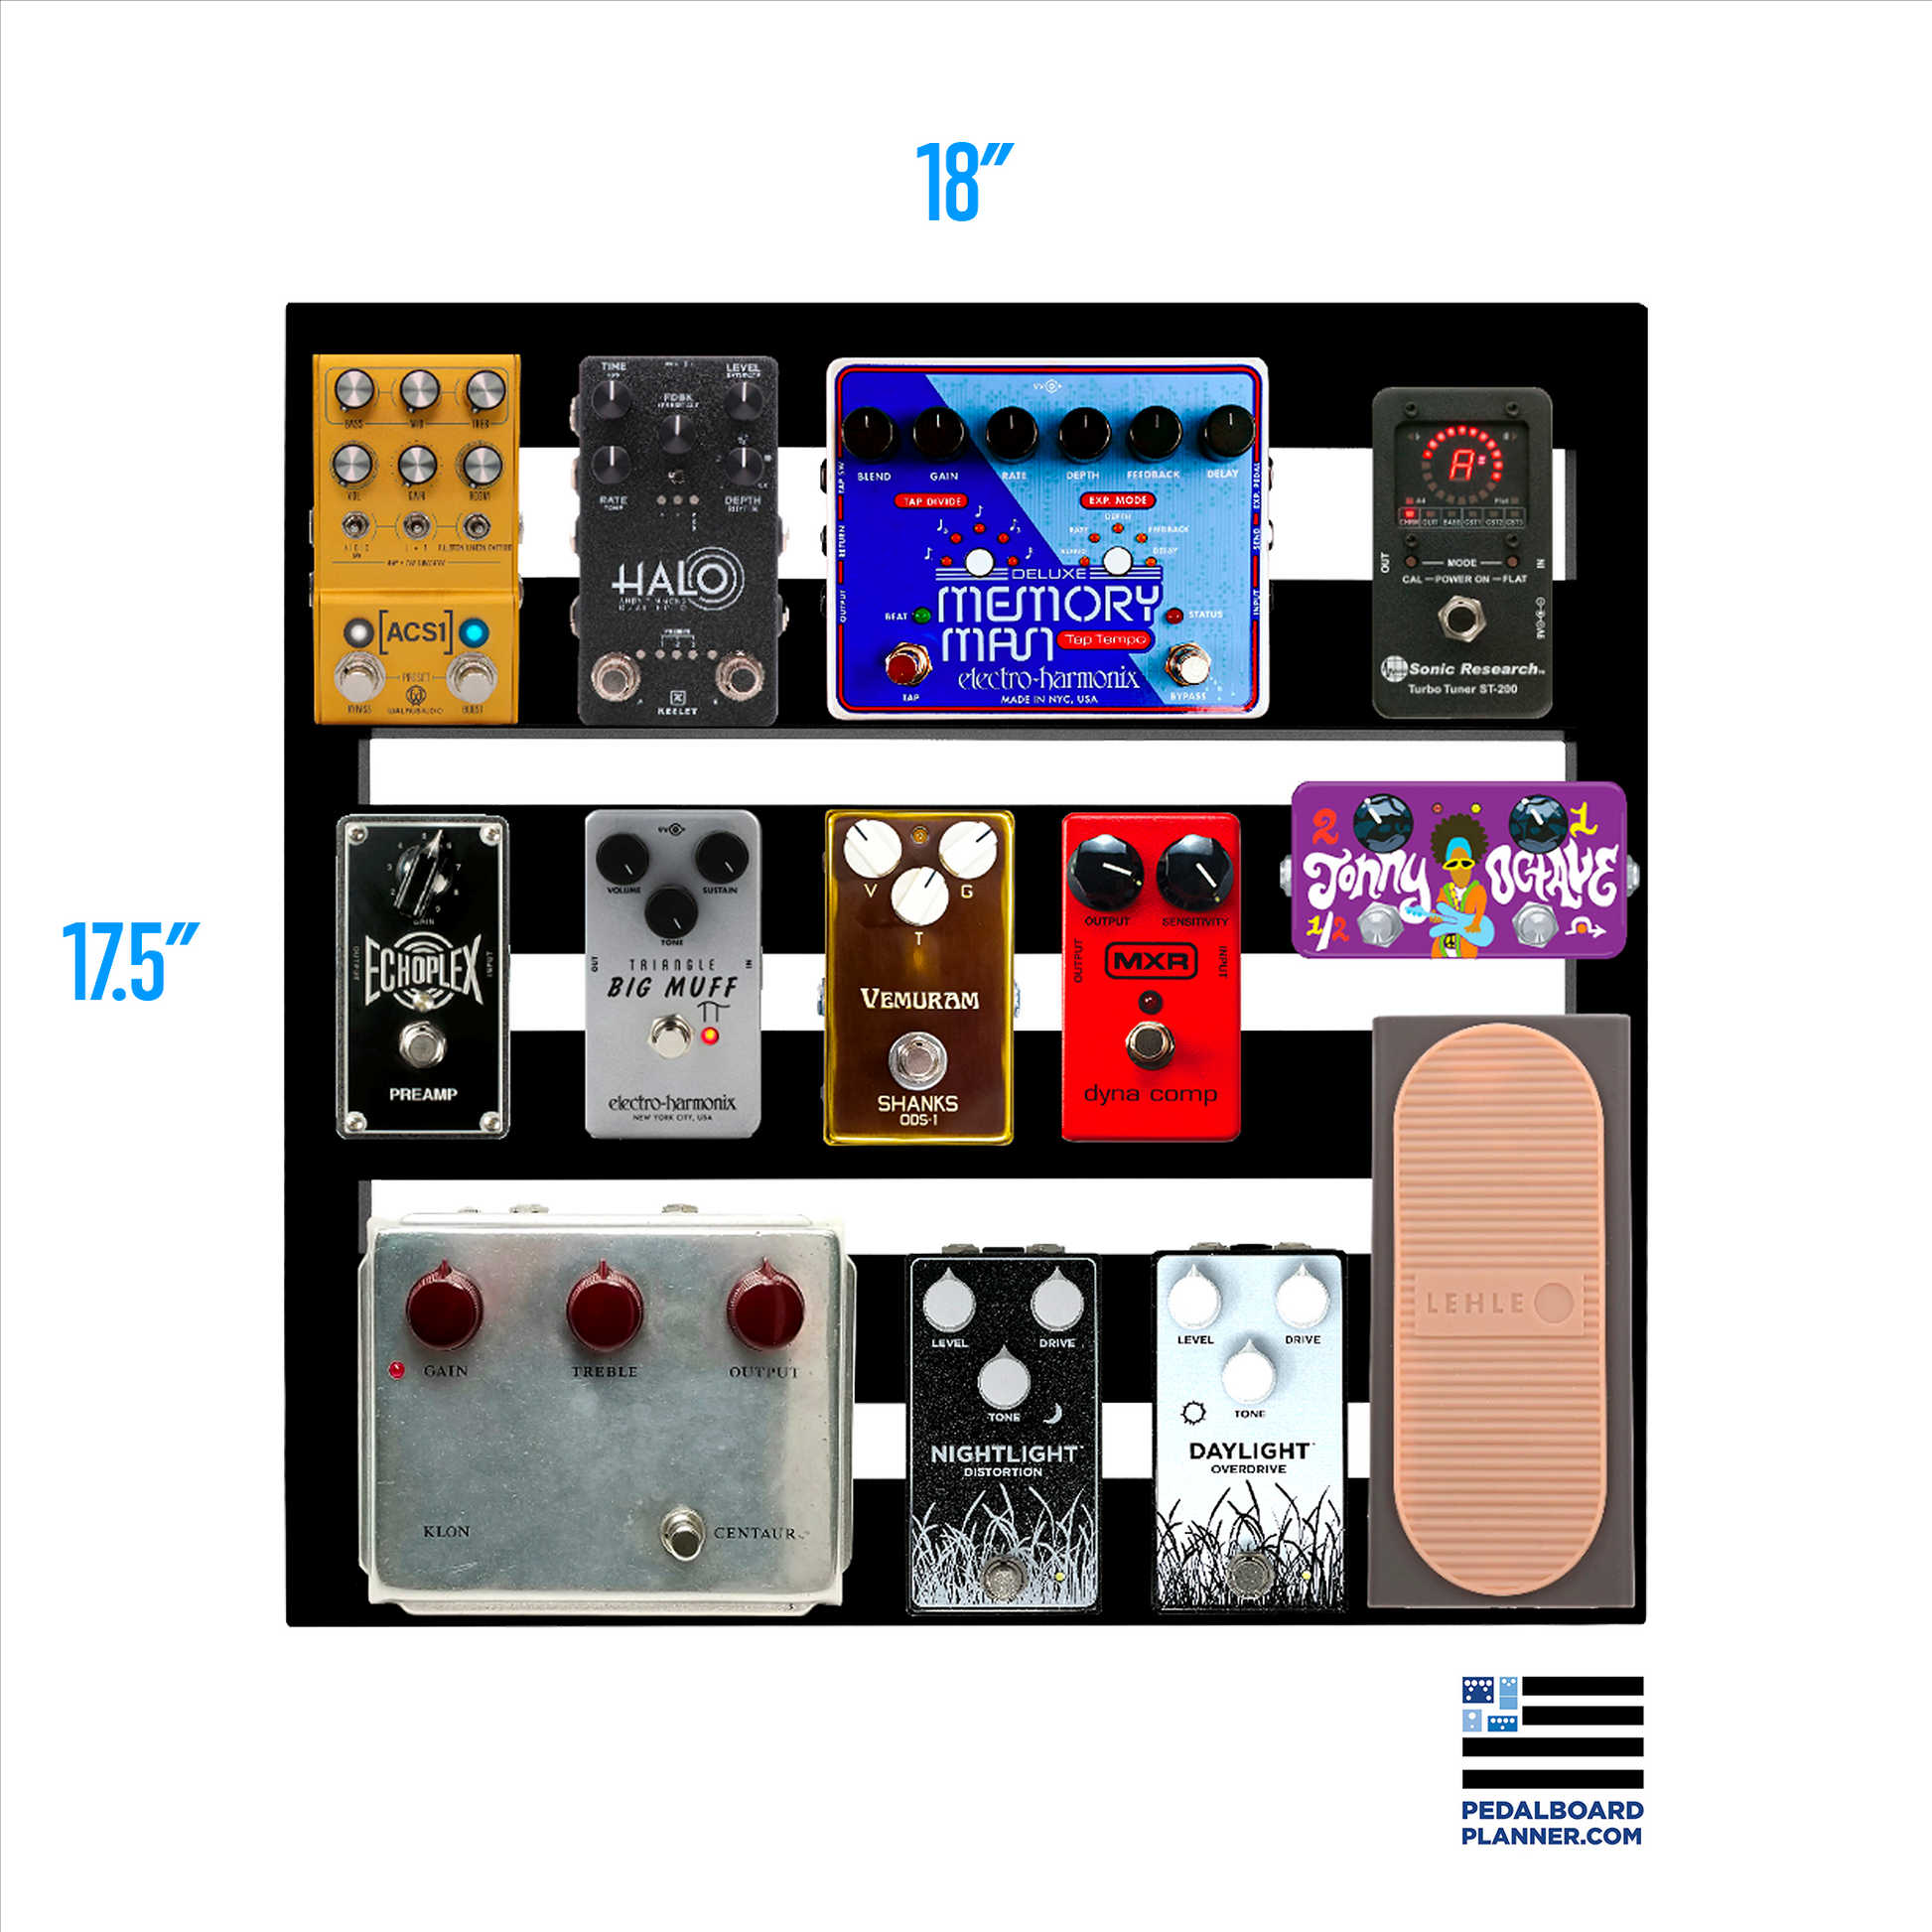 Top down of Pedaltrain XD-18 with example rig and dimensions.